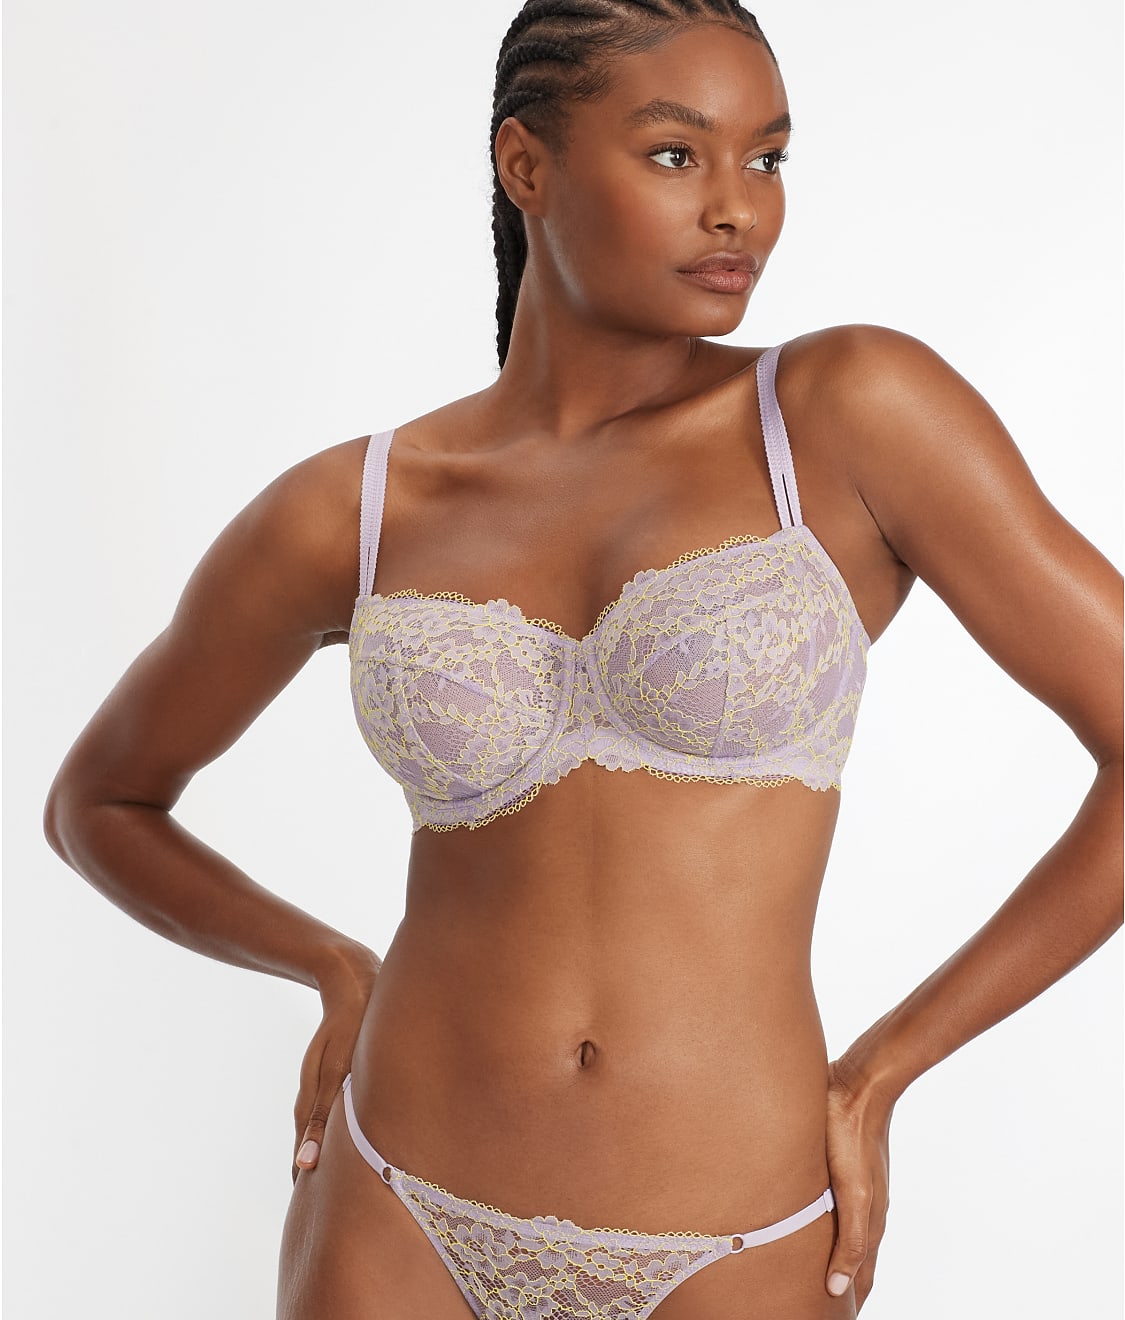 Cacique Lane Bryant Nude Unlined Support Bra 40D